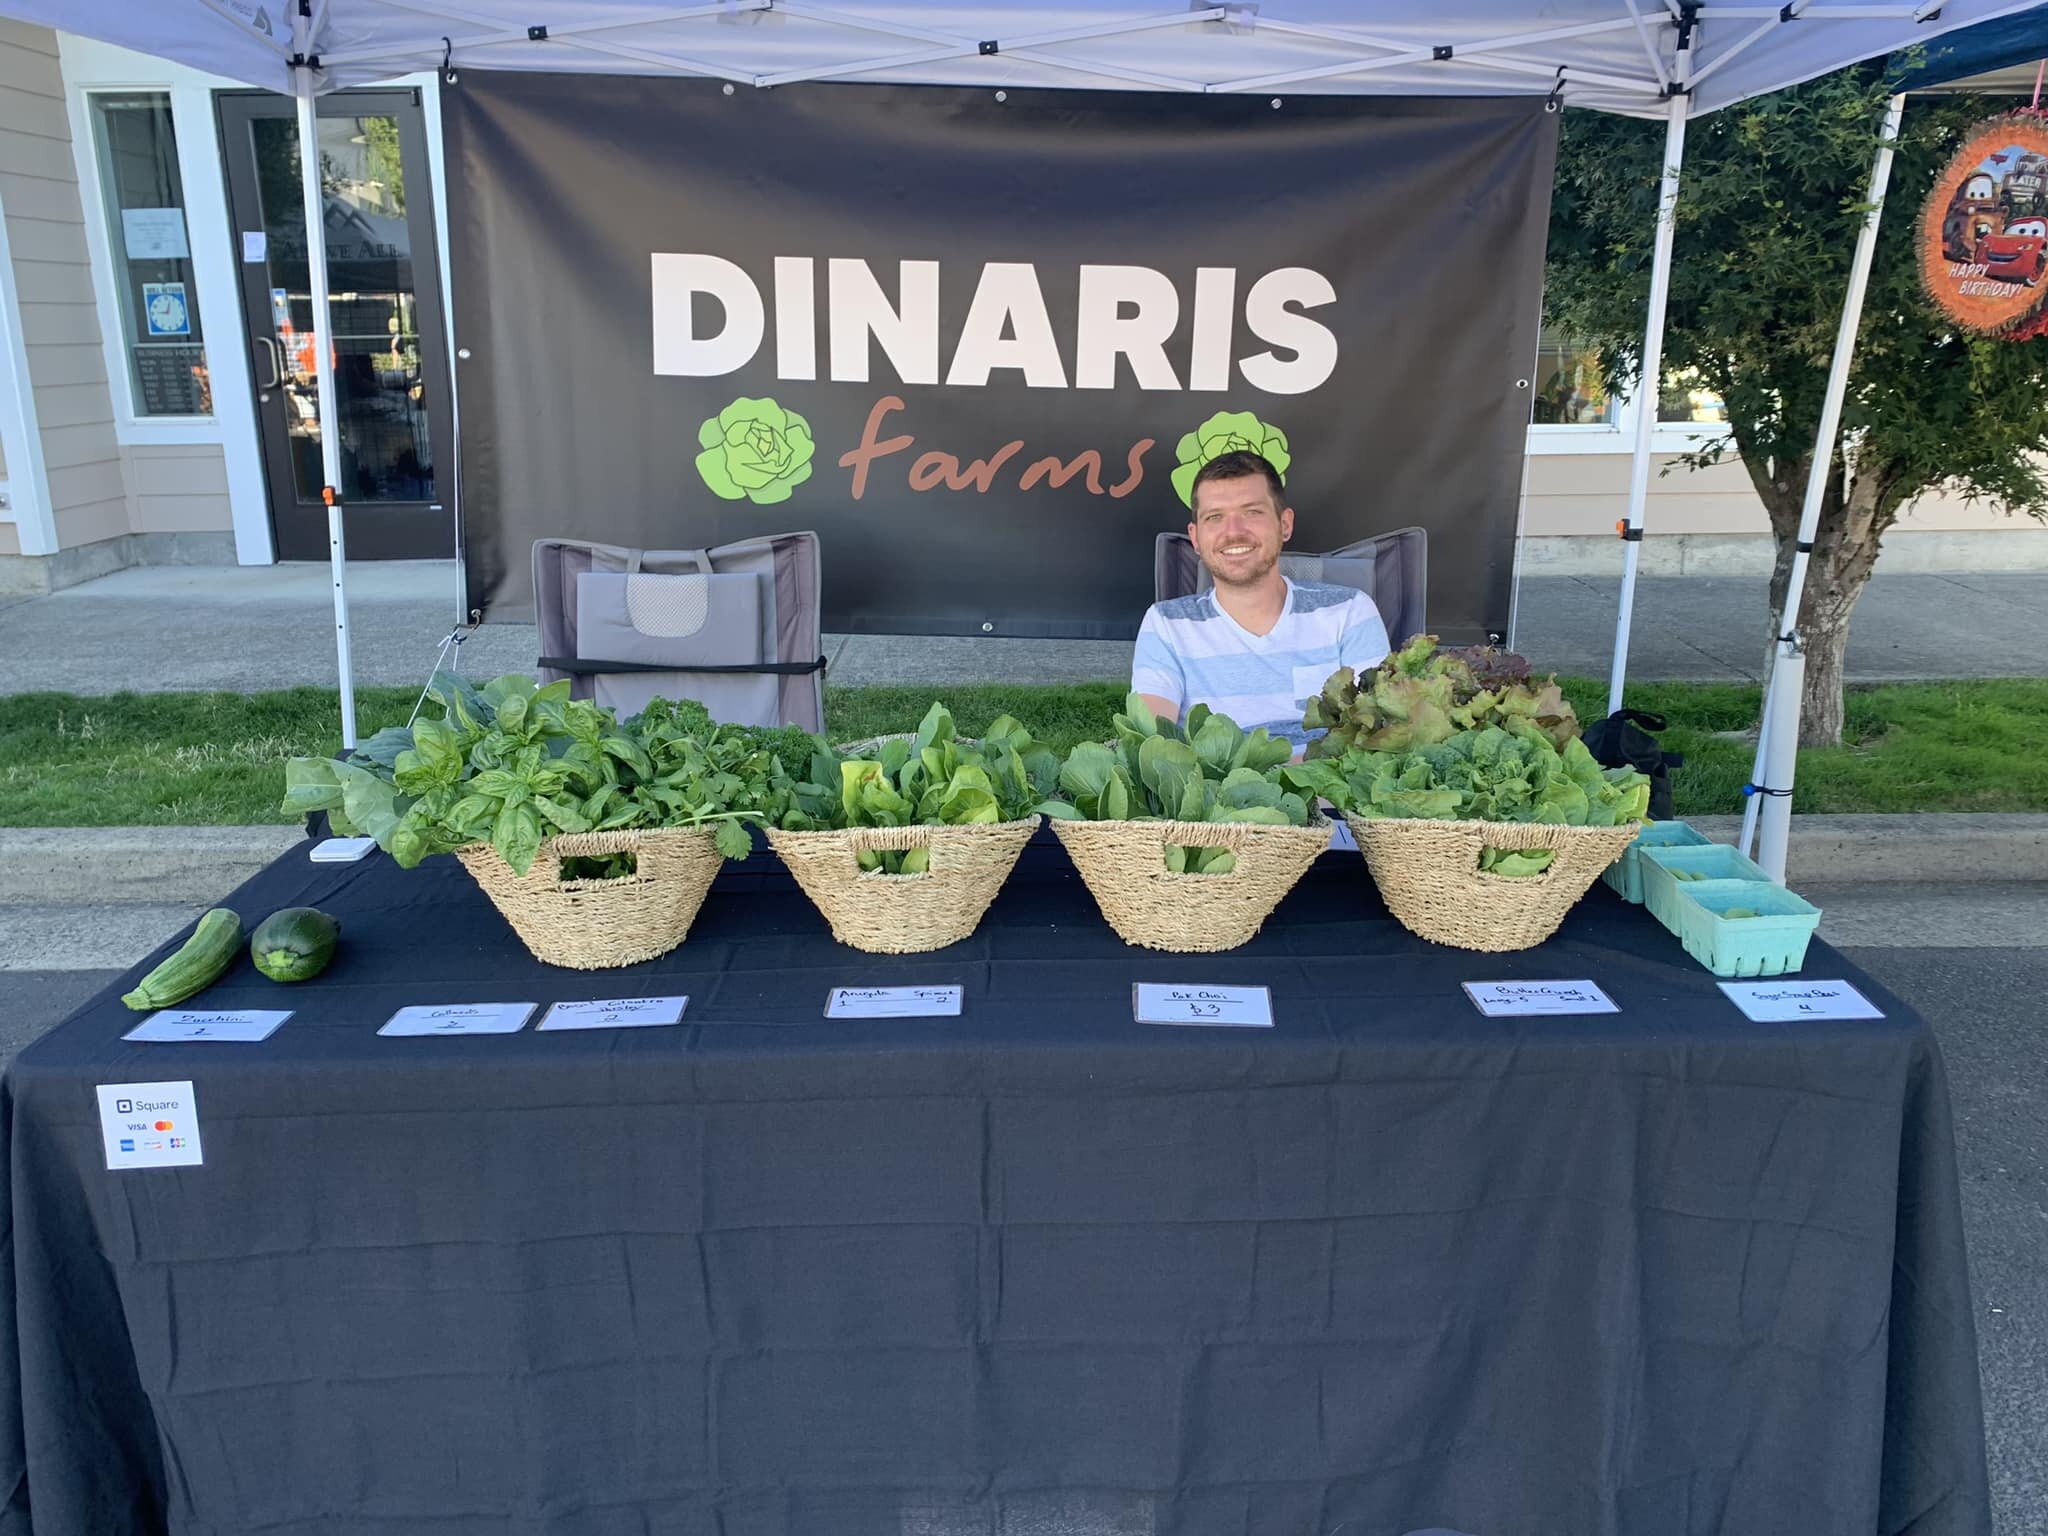 We&rsquo;re over at the Scappoose Farmers Market today from 9-2pm. Come on over and say hello! 💚